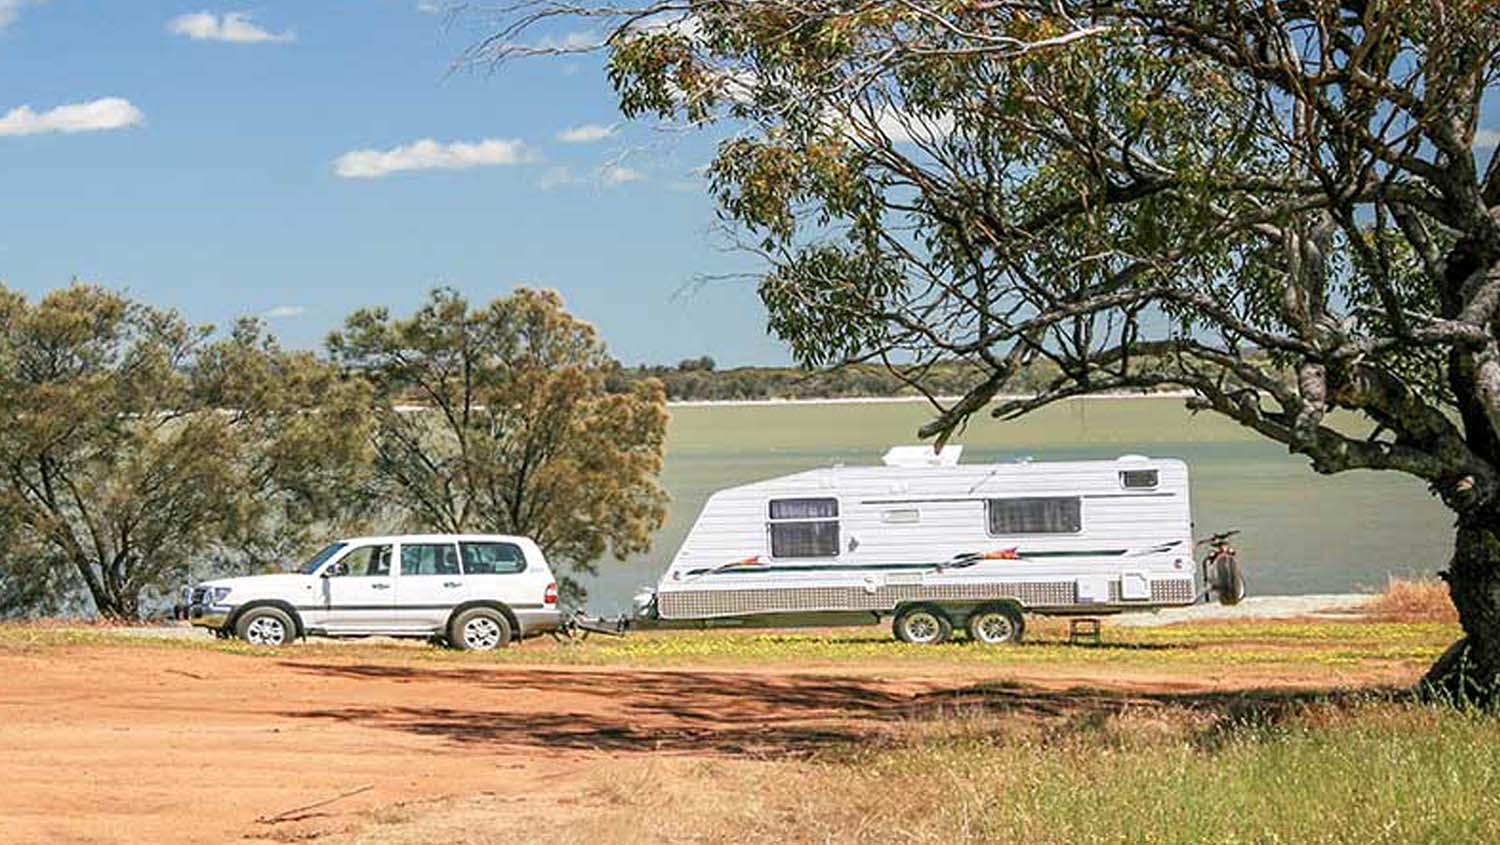 New vs. Used- Which Caravan Is for You?